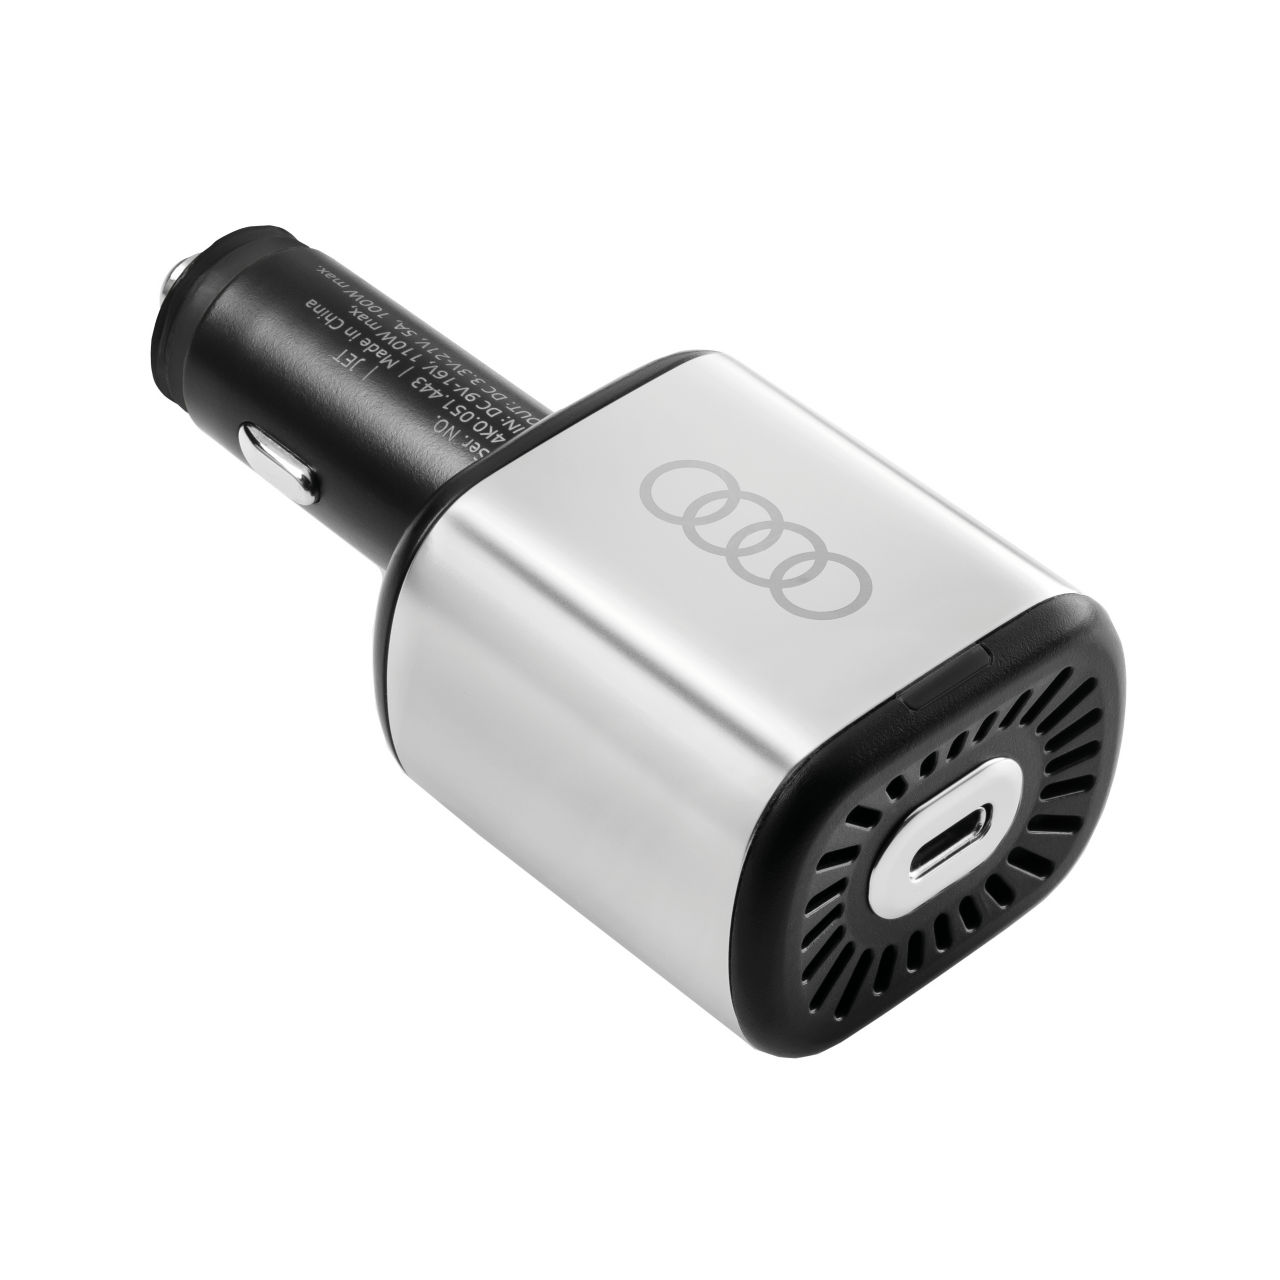 USB power charger - Audi Original Accessories Germany